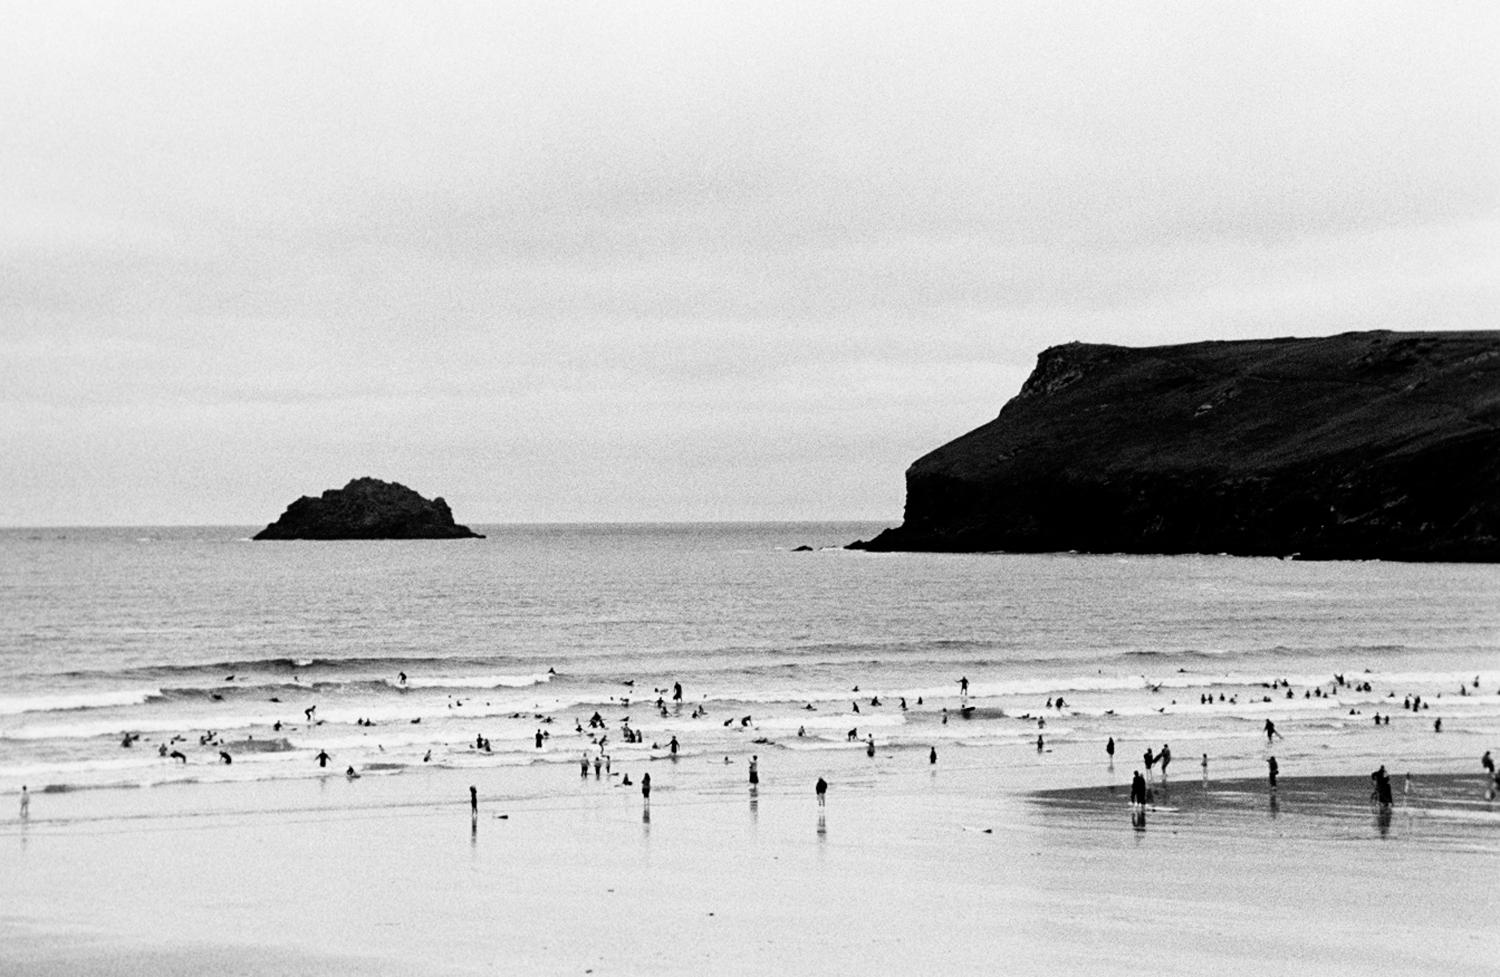 Robin Rice Black and White Photograph – Tiny Surfers in the Celtic Sea, Polzeath, England, UK, 2010